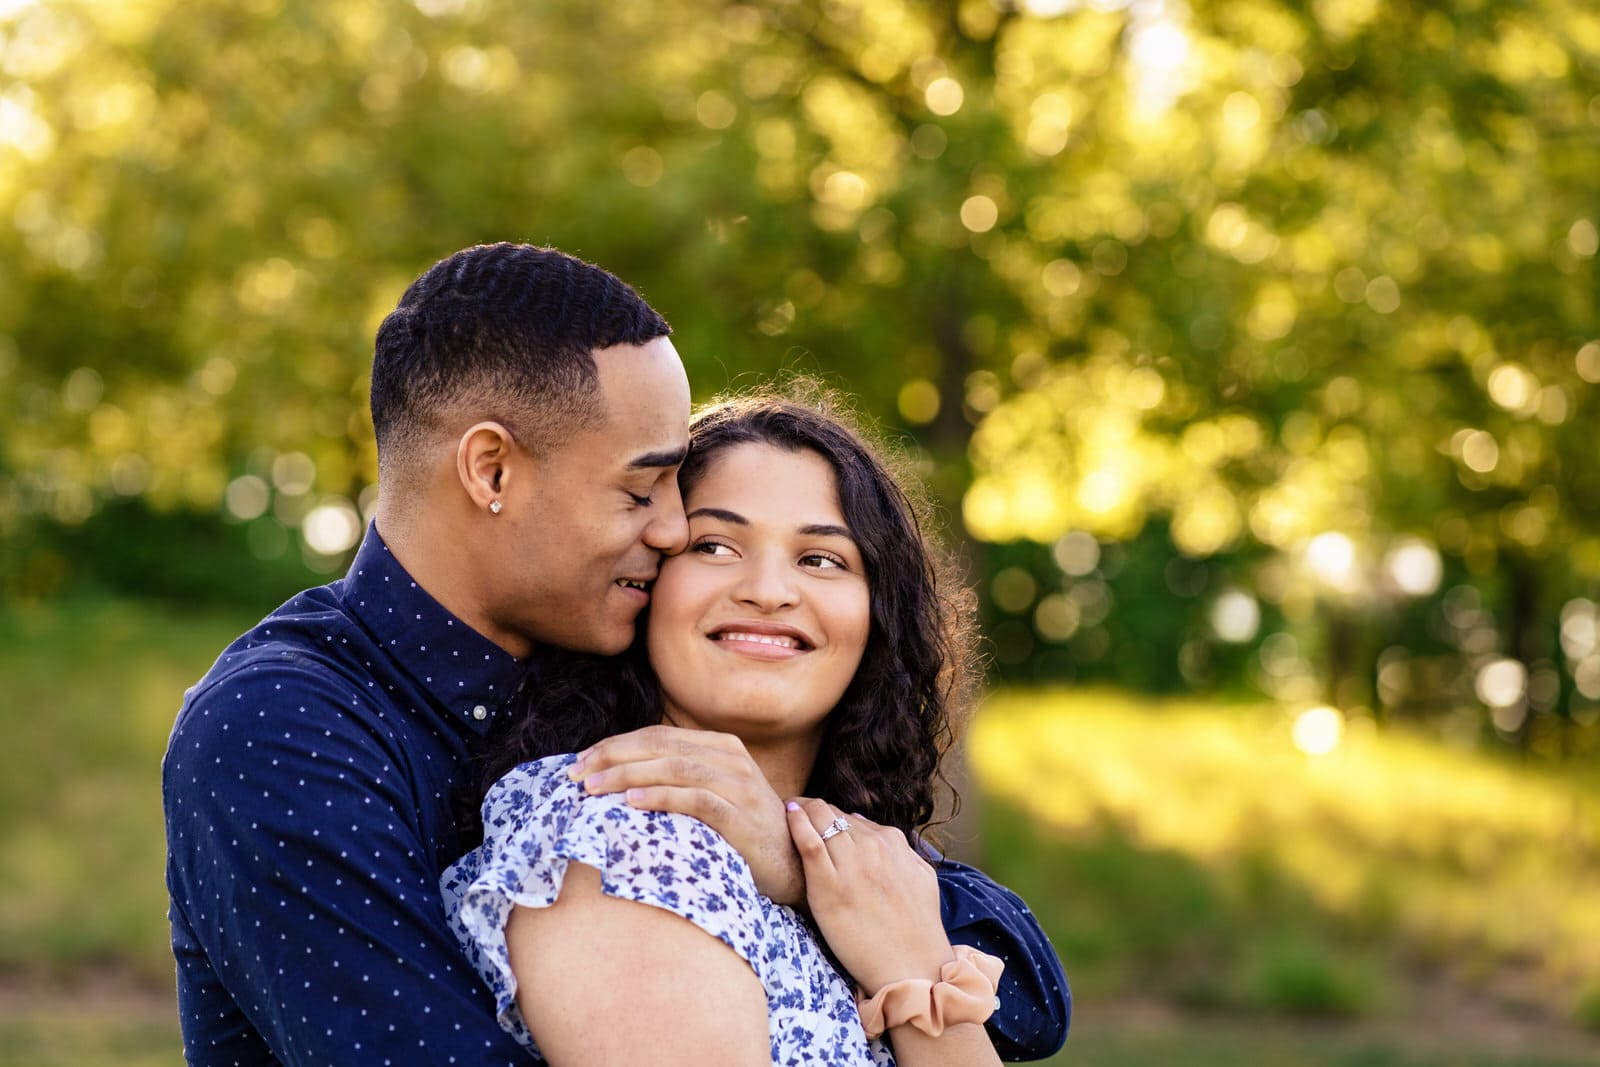 Your engagement photos should be a time for y'all to connect and be happy in love!